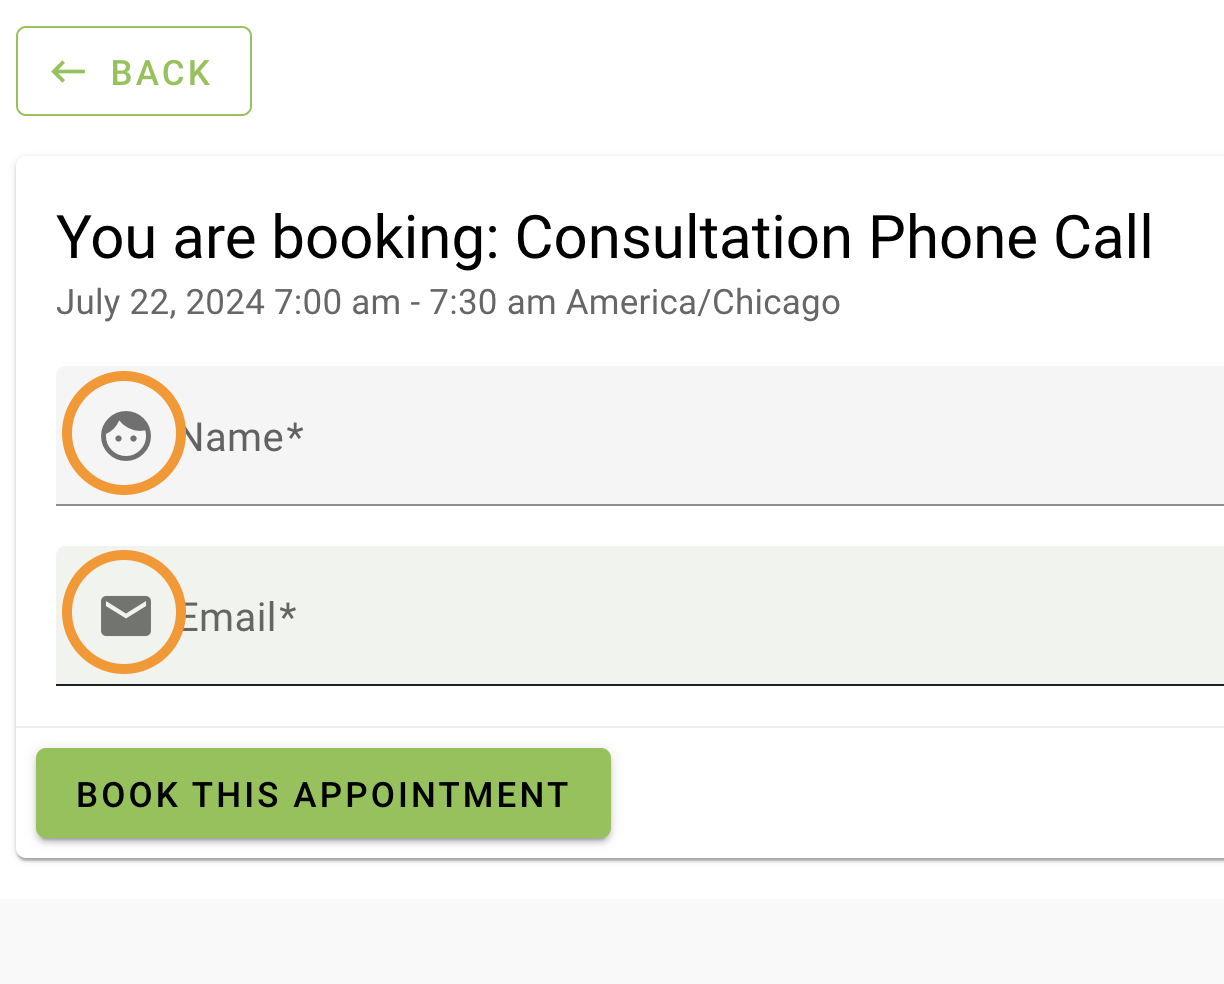 Field Icons on the booking form highlighted and shown right next to the field labels.